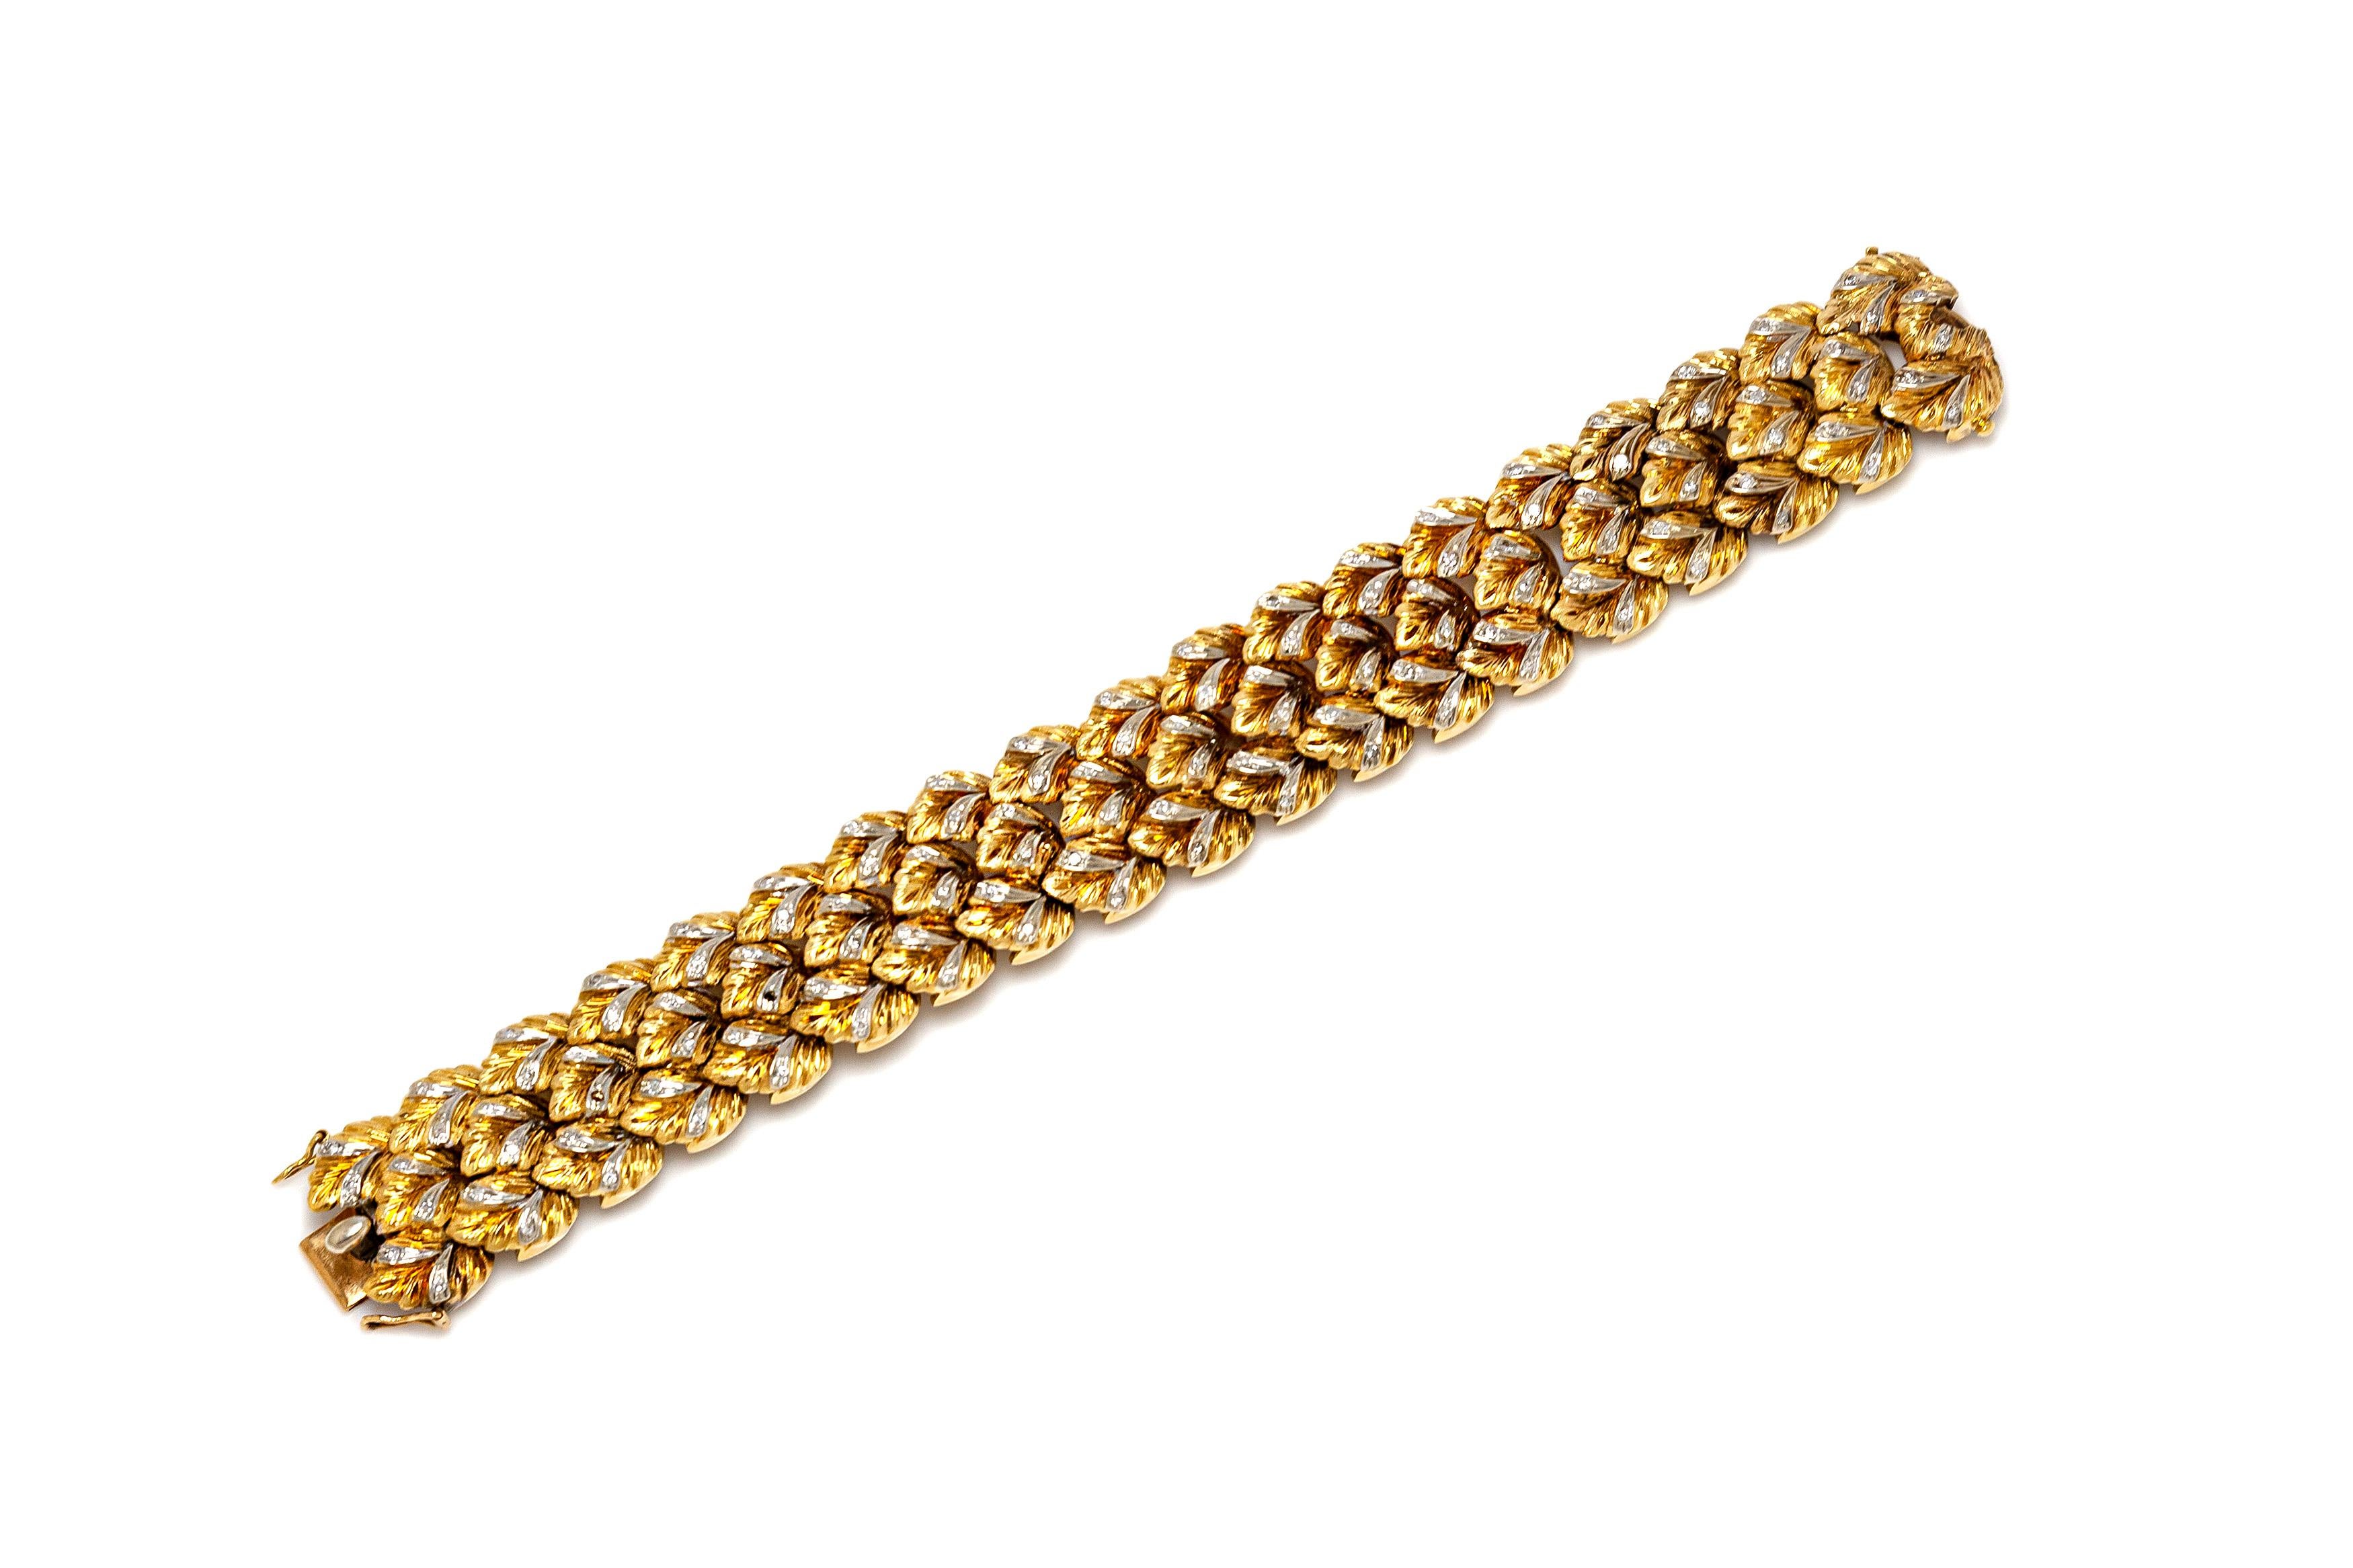 Bracelet, finely crafted in 18k yellow gold with diamonds weighing 39.9 dwt. Length of the bracelet is 7inch/18cm and the width is 0.75 inch/2 cm. Circa 1950's.